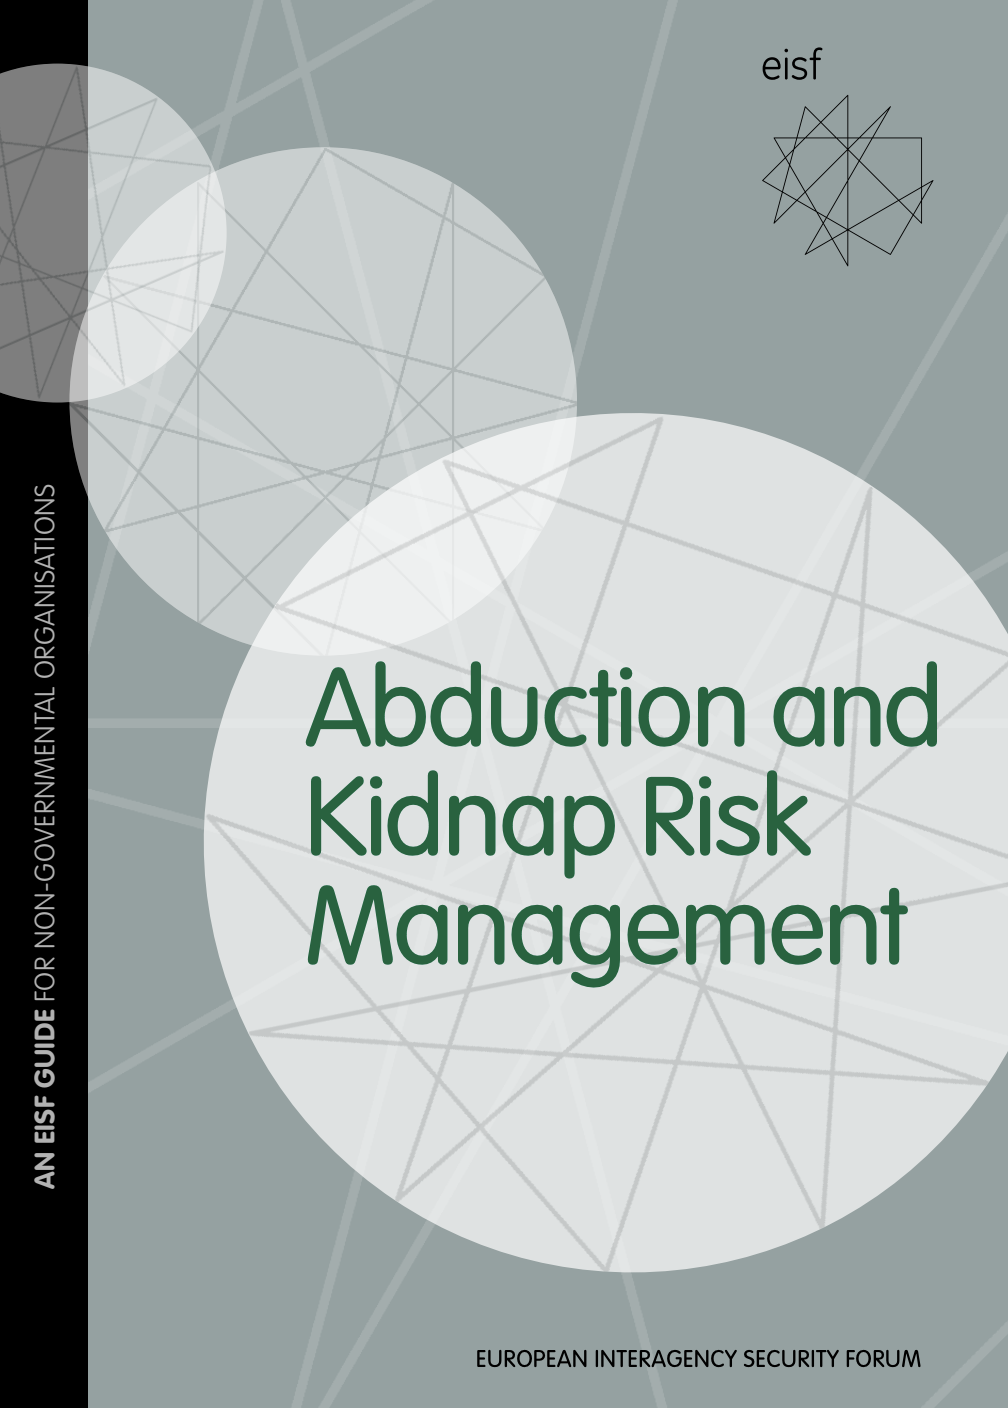 Abduction and Kidnap Risk Management Guide